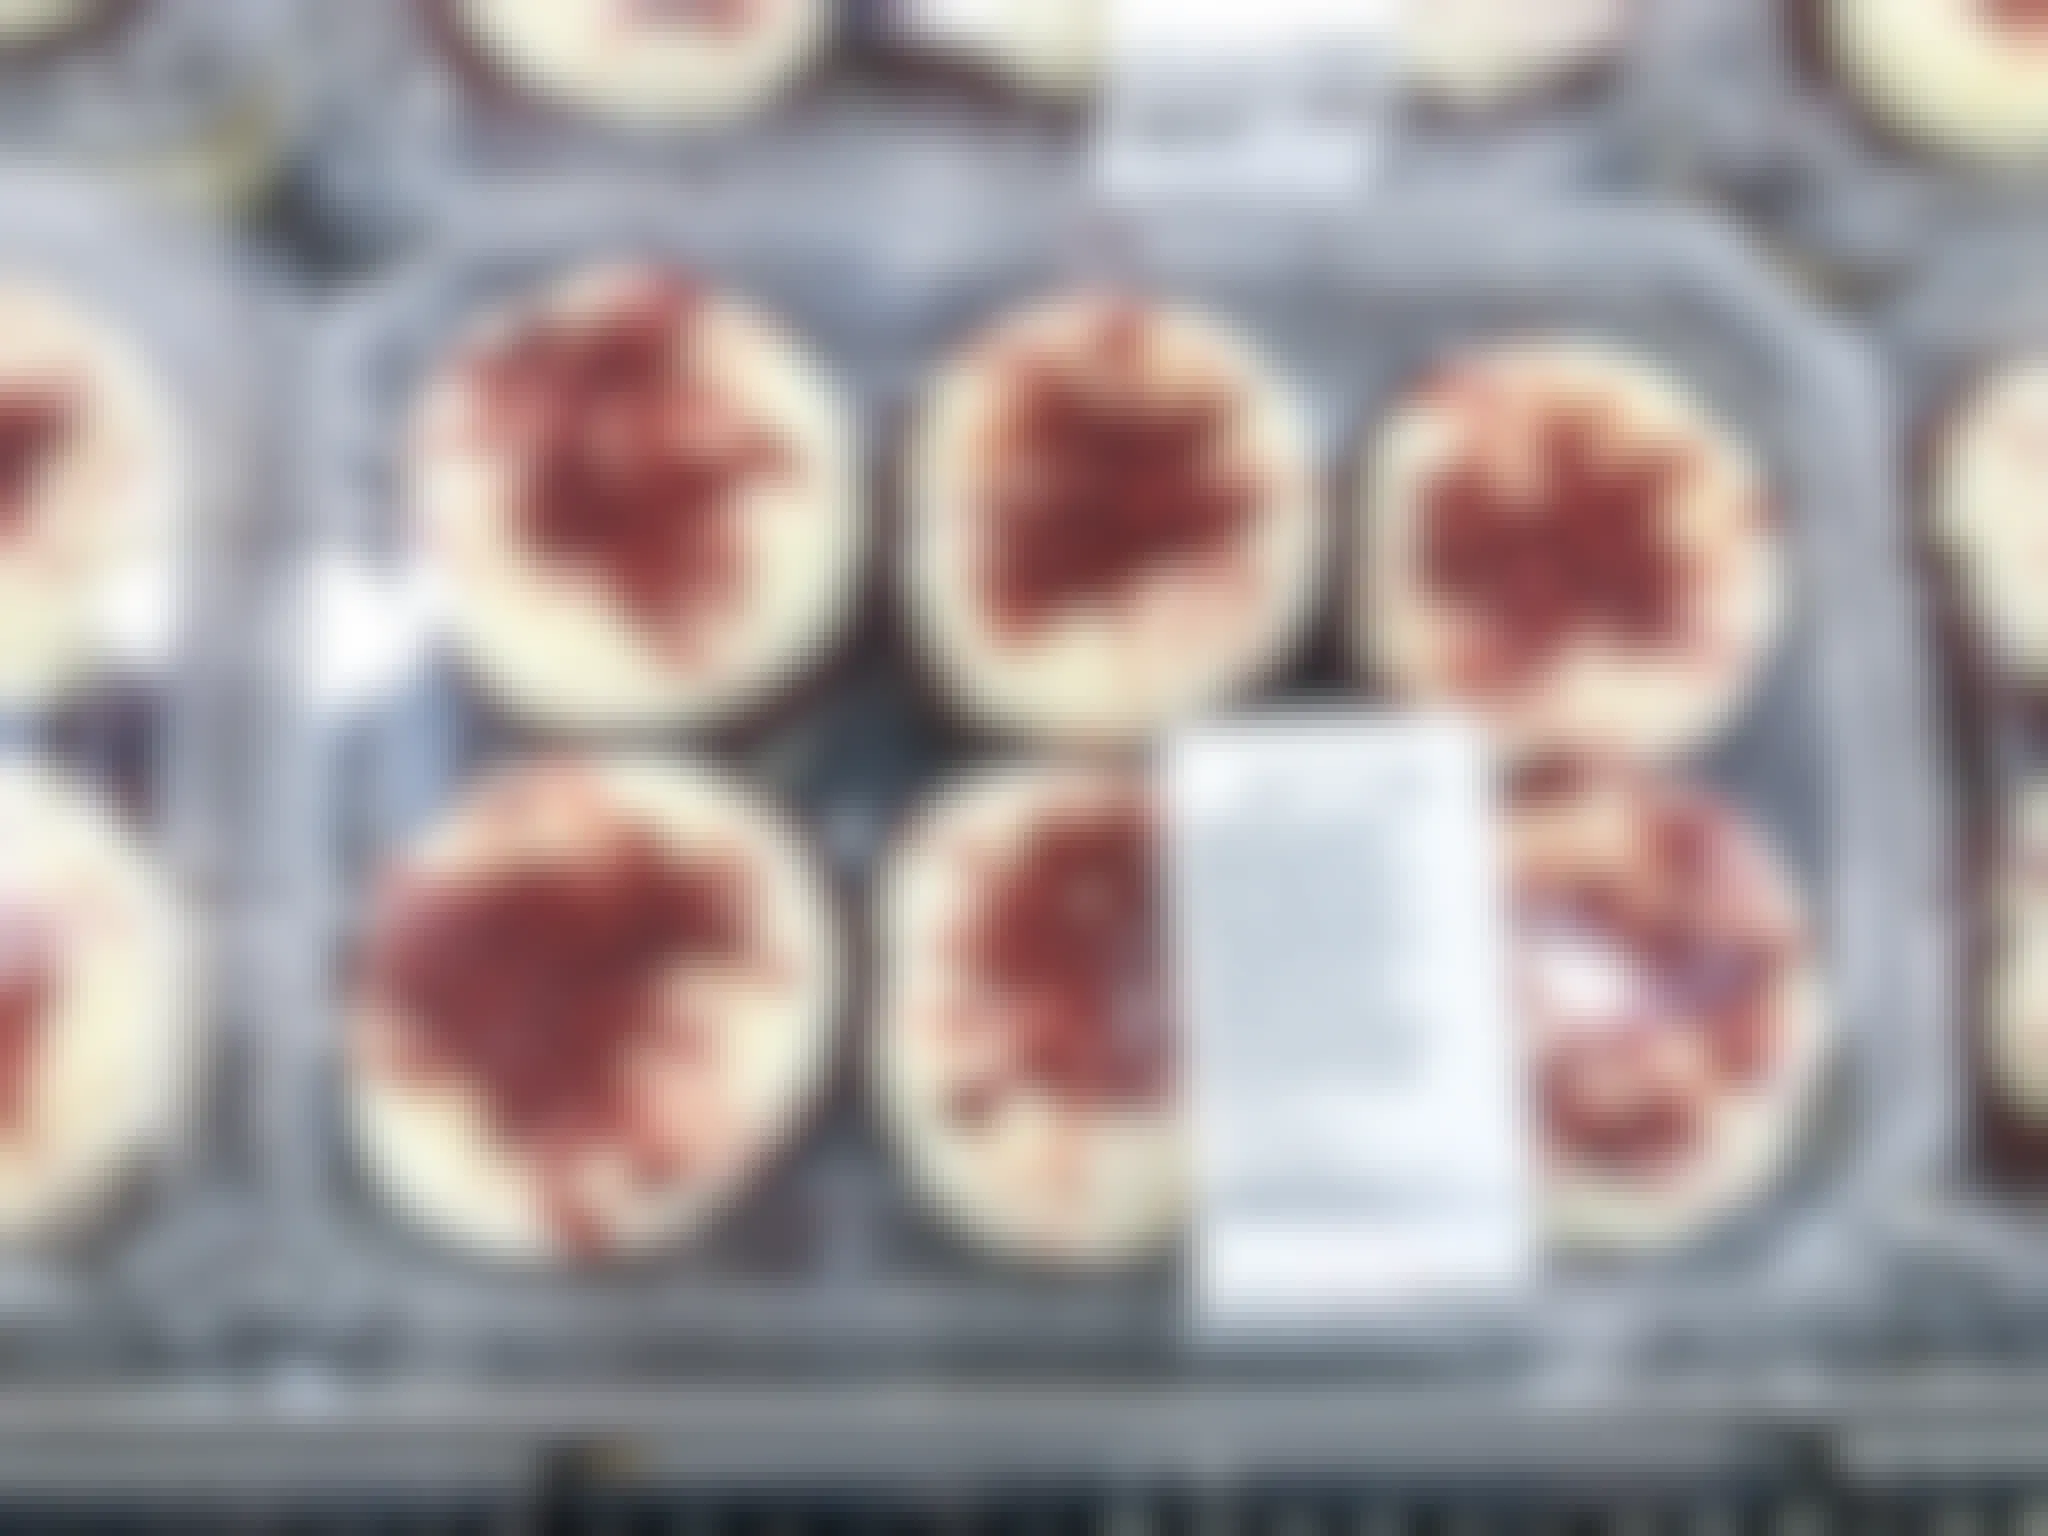  package of costco red velvet cakes in store 